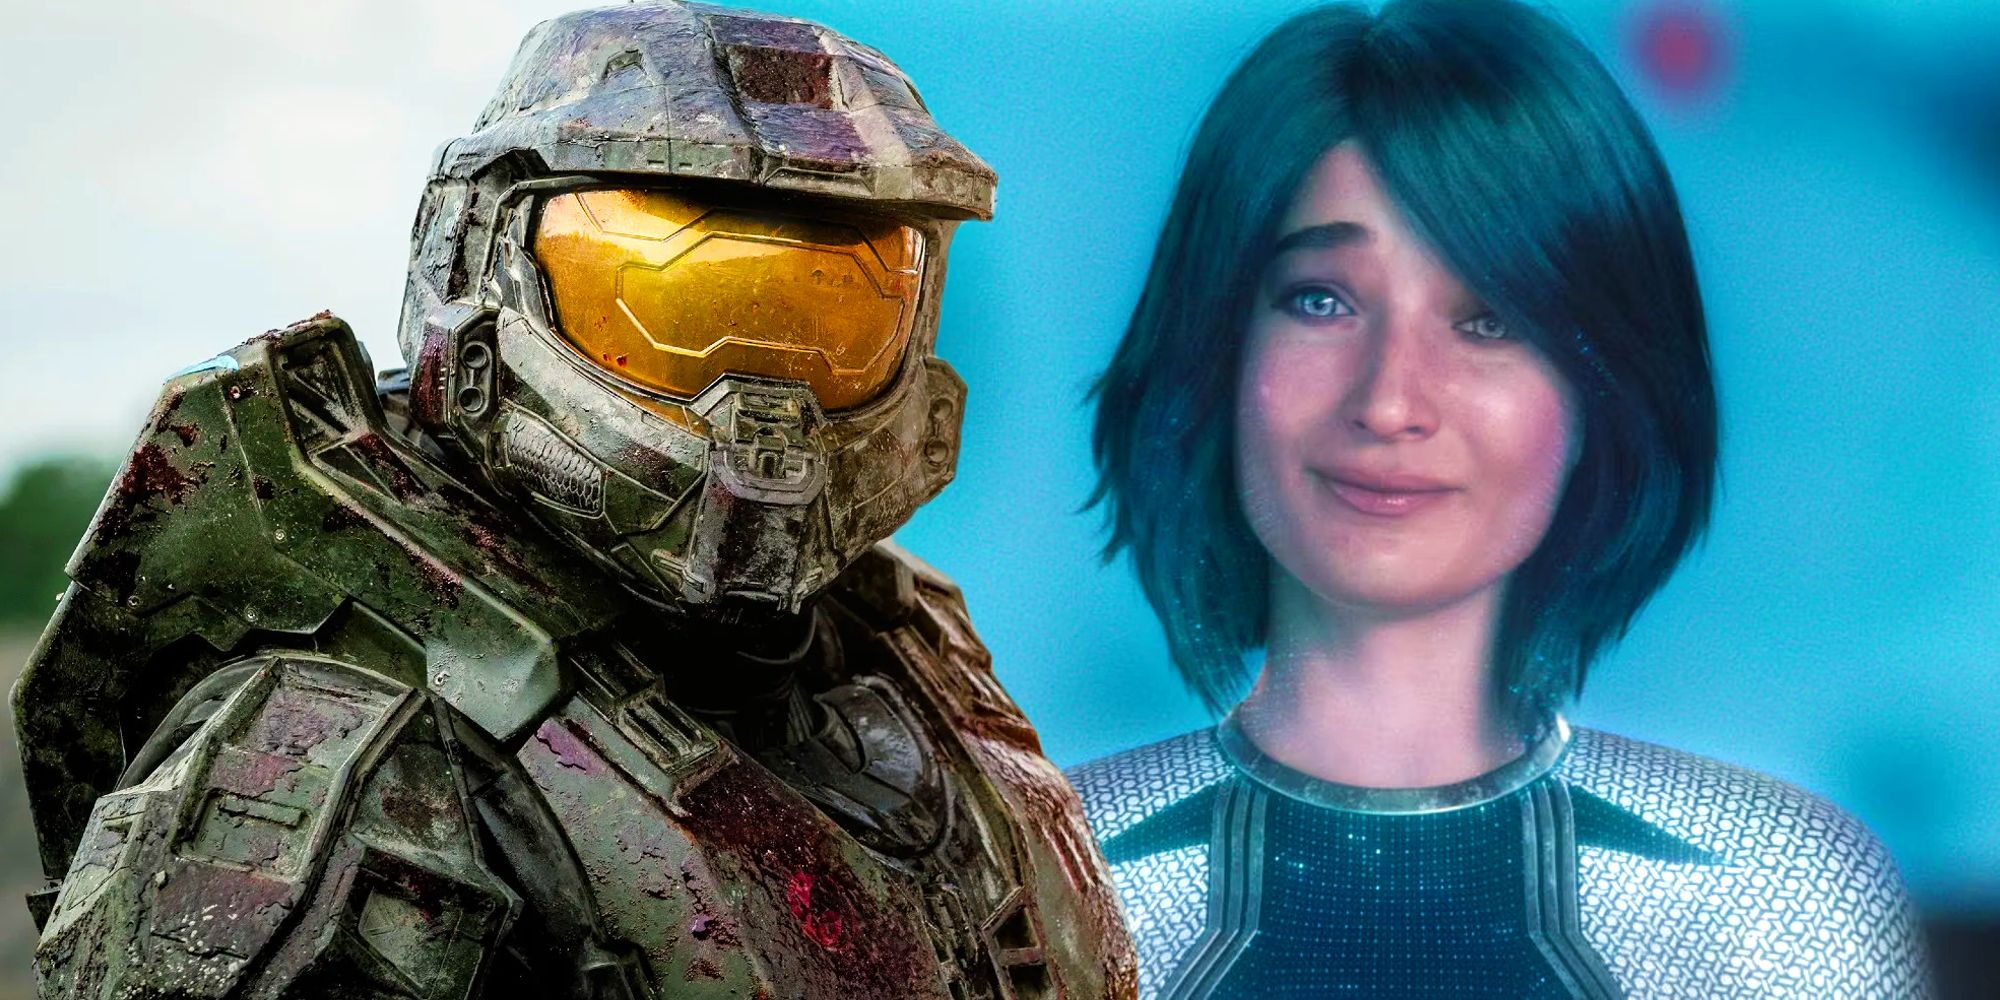 Master Chief and Cortana from Paramount's Halo TV show